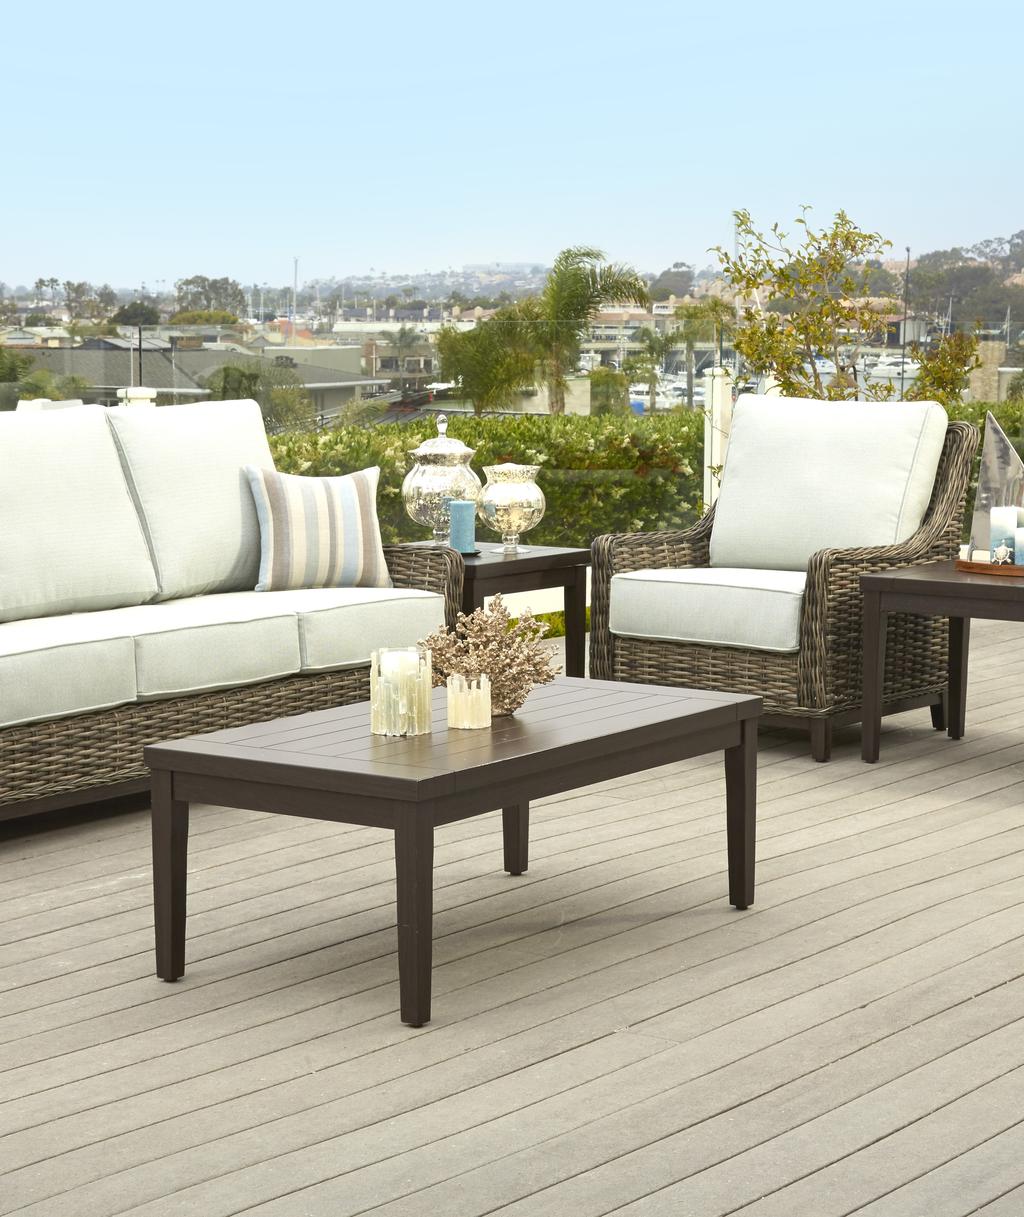 TUESDAY SEP TEMBER 10 TO FRIDAY SEPTEMBER 13 2019 SEE THE WORLD OF OUTDOOR FURNISHINGS Discover new products, hundreds of